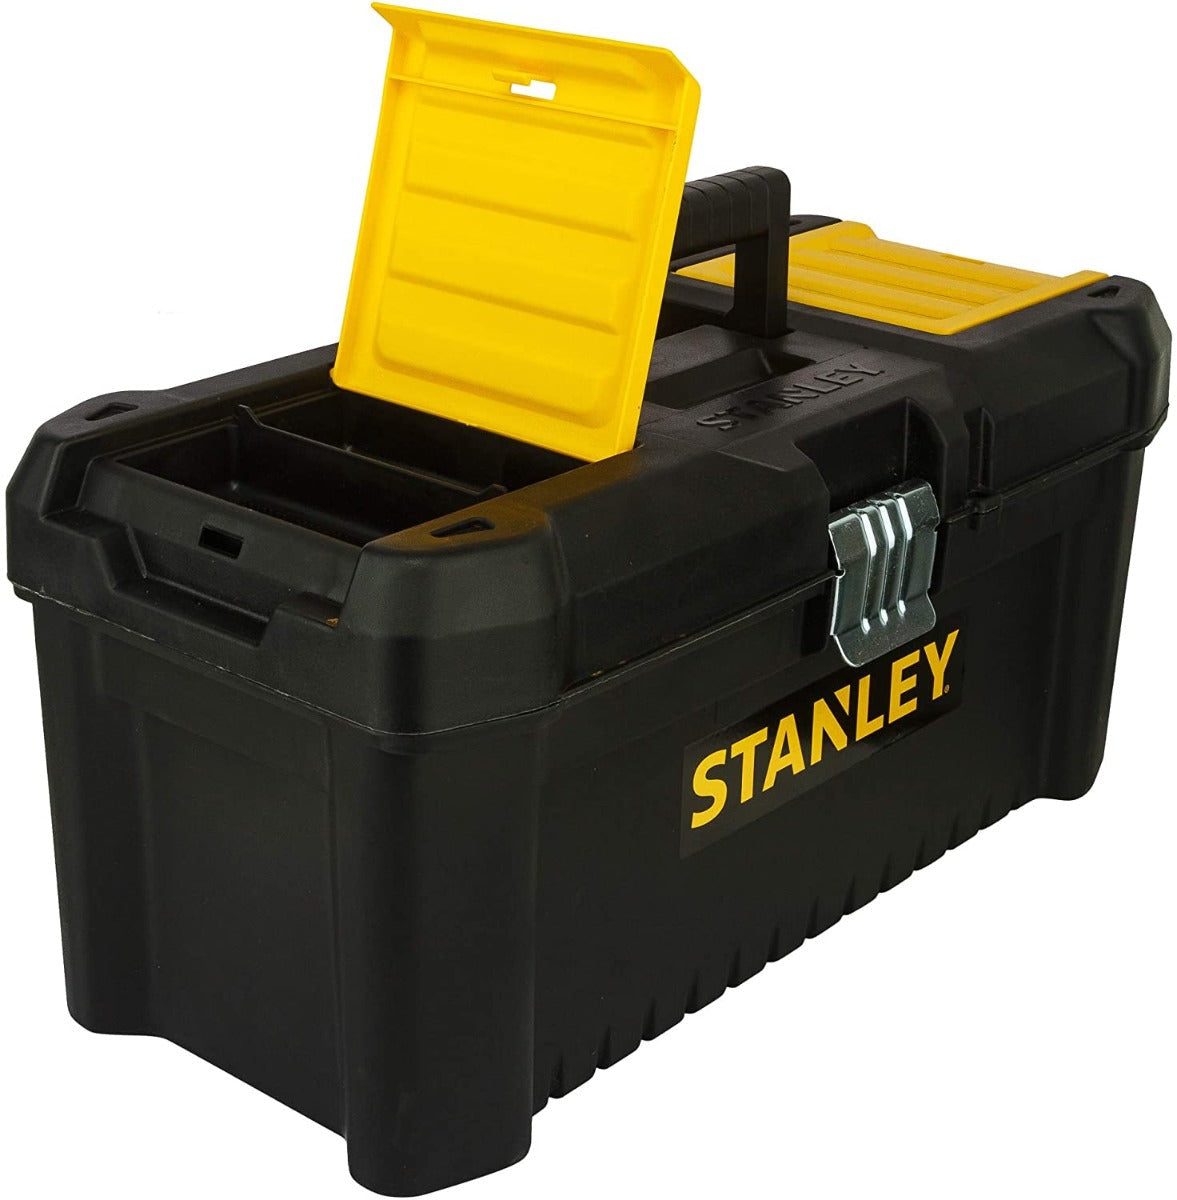 Stanley STST1-75518 Essential Toolbox with Metal Latch, 16''